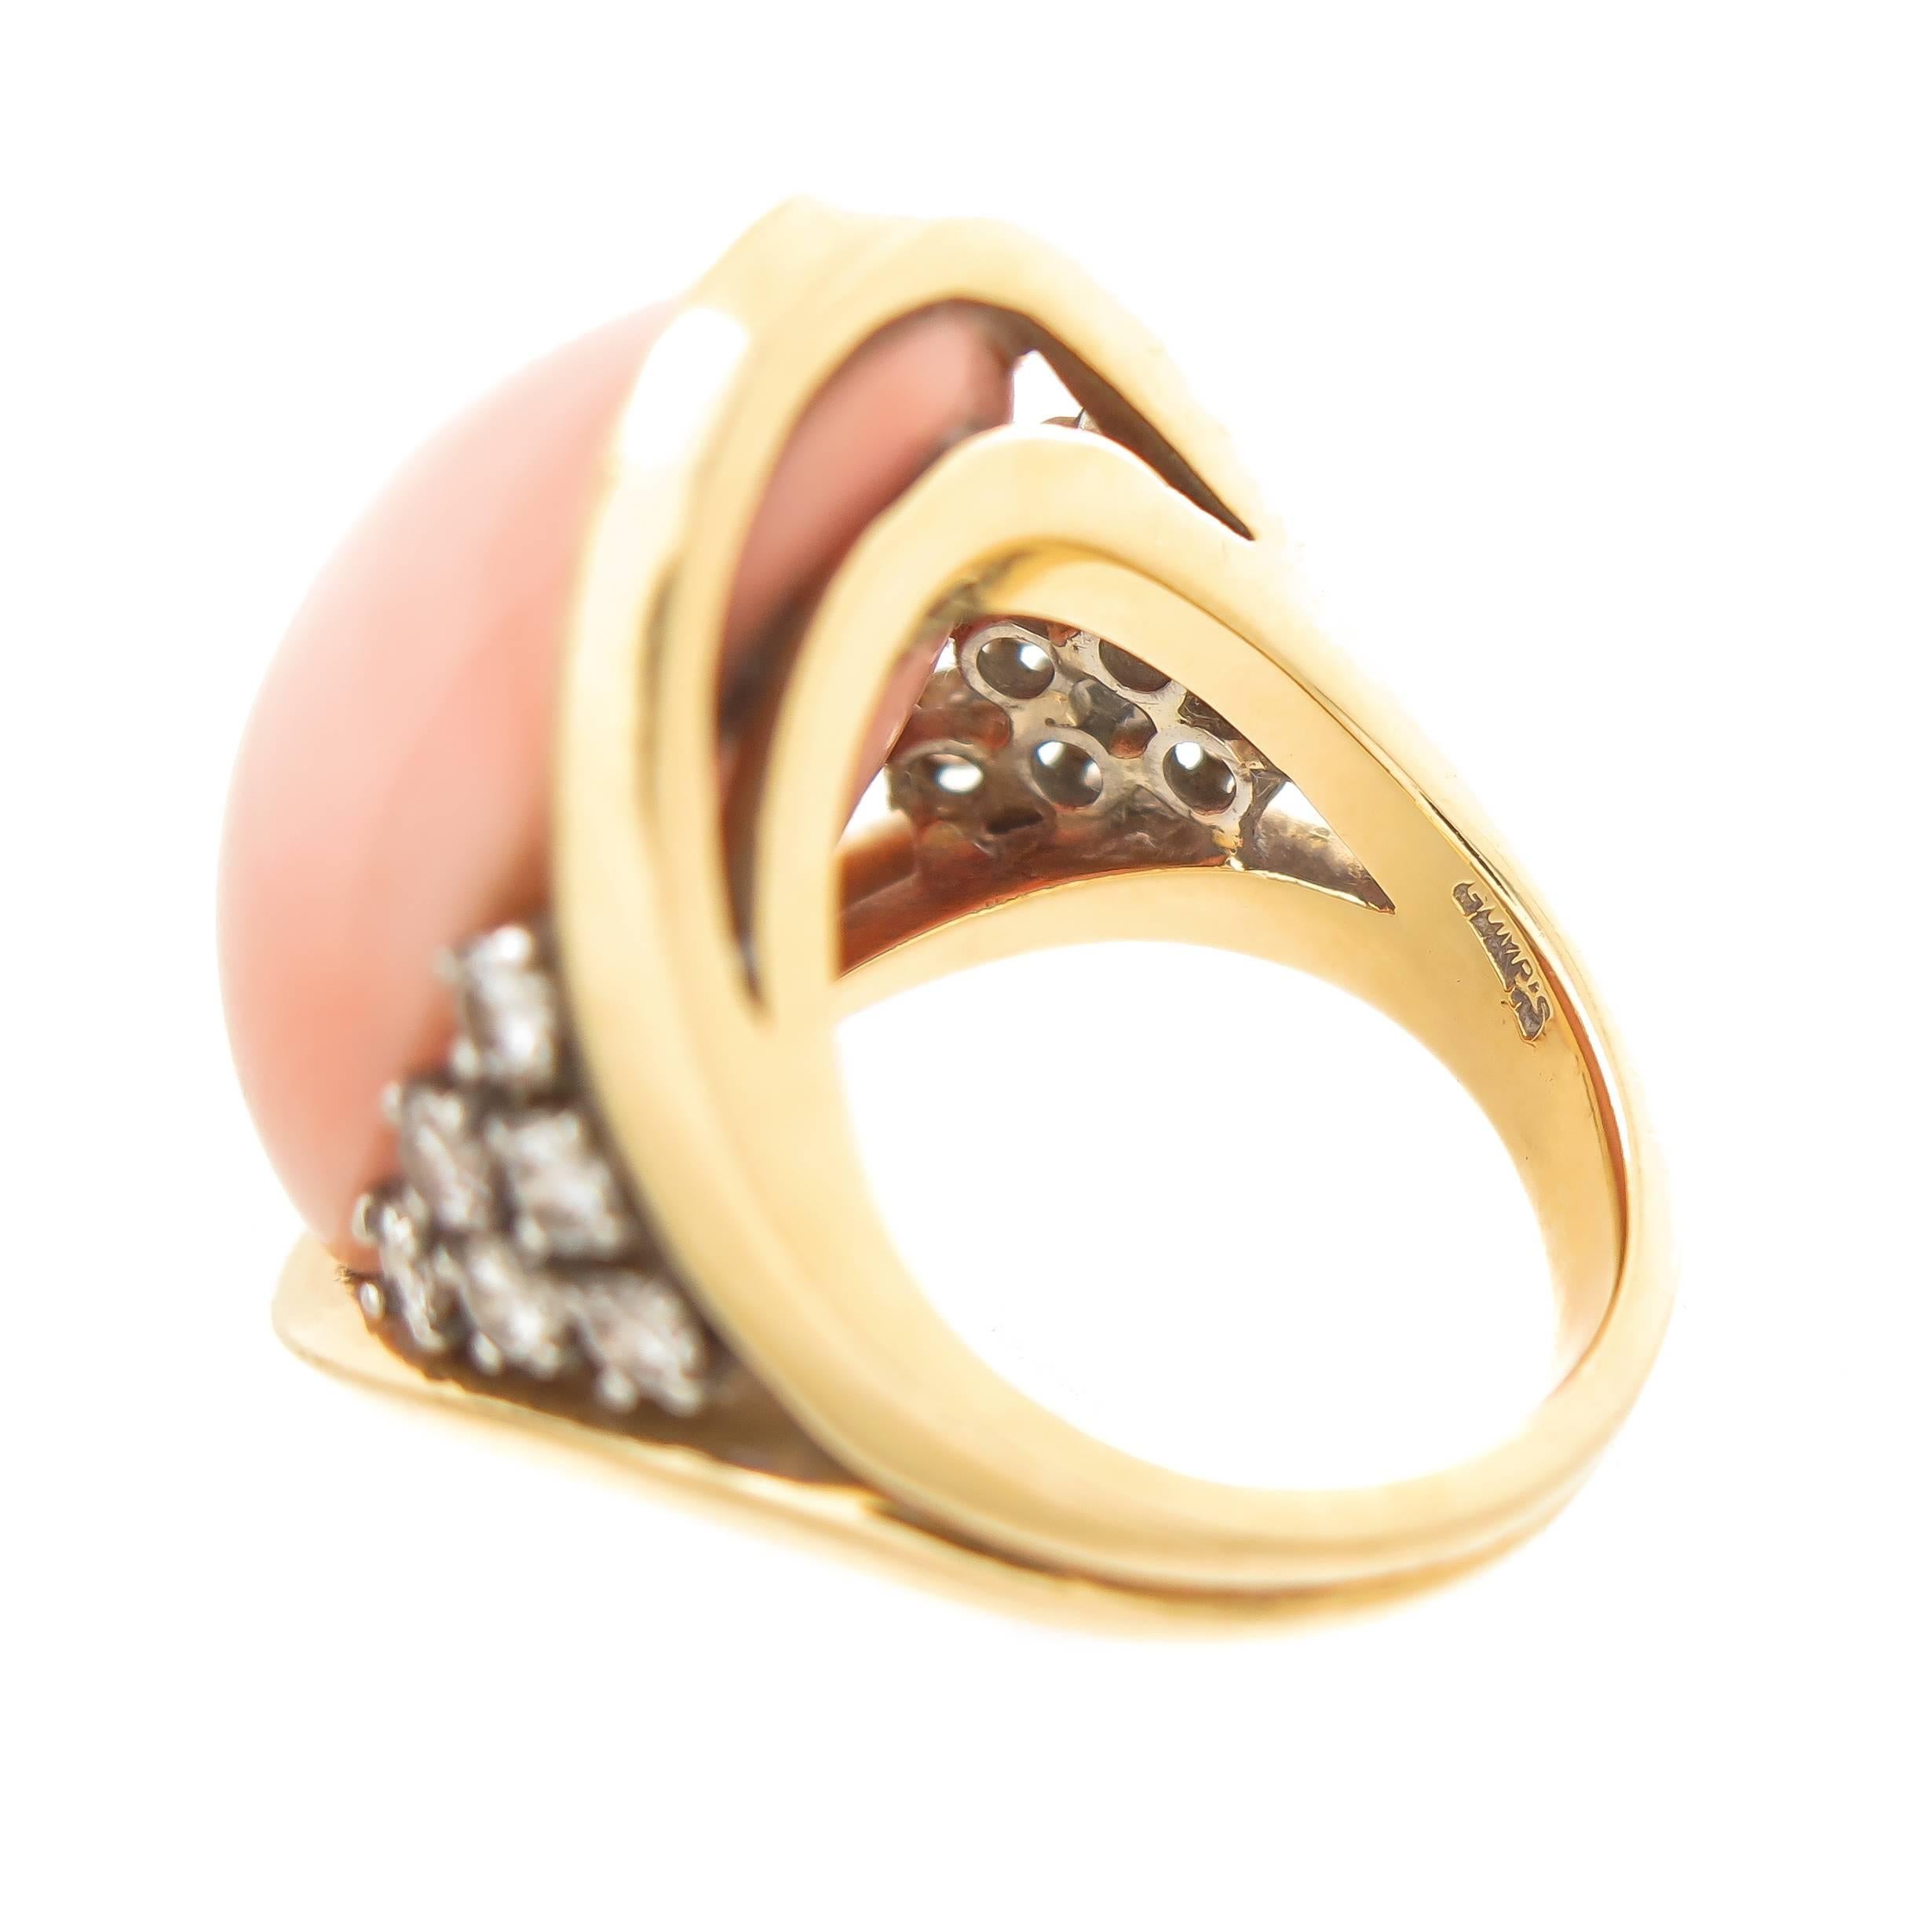 Circa 1980s Gumps 18K yellow Gold Ring, set with a Coral measuring 22 X 18 M.M. set on either side with Round Brilliant cut Diamonds totaling 1/2 Carat. The ring measures 1 1/16 inch in length across the top and is a finger size 6.